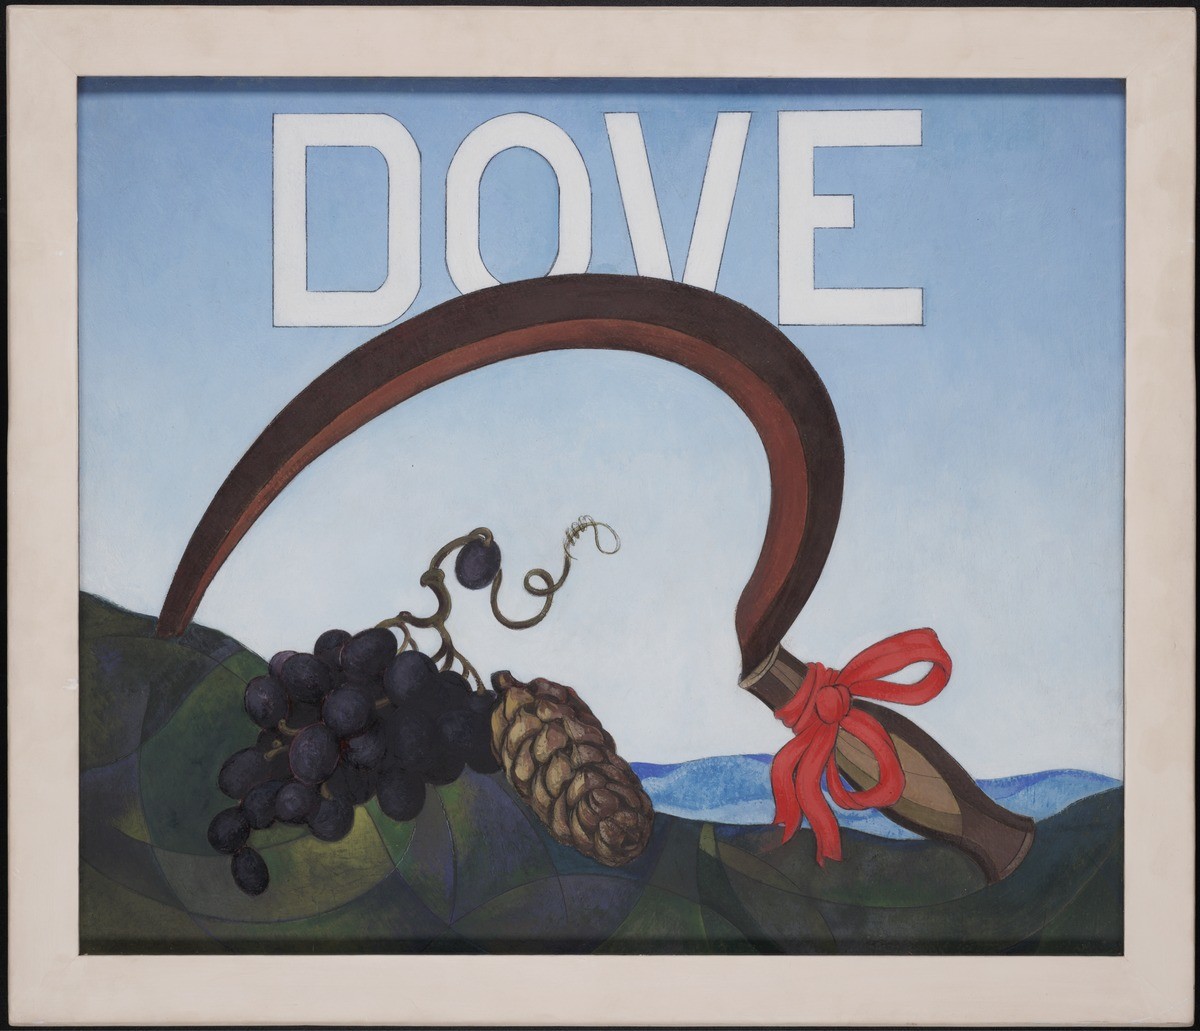 Two Poster Portraits by Charles Demuth Arthur Dove